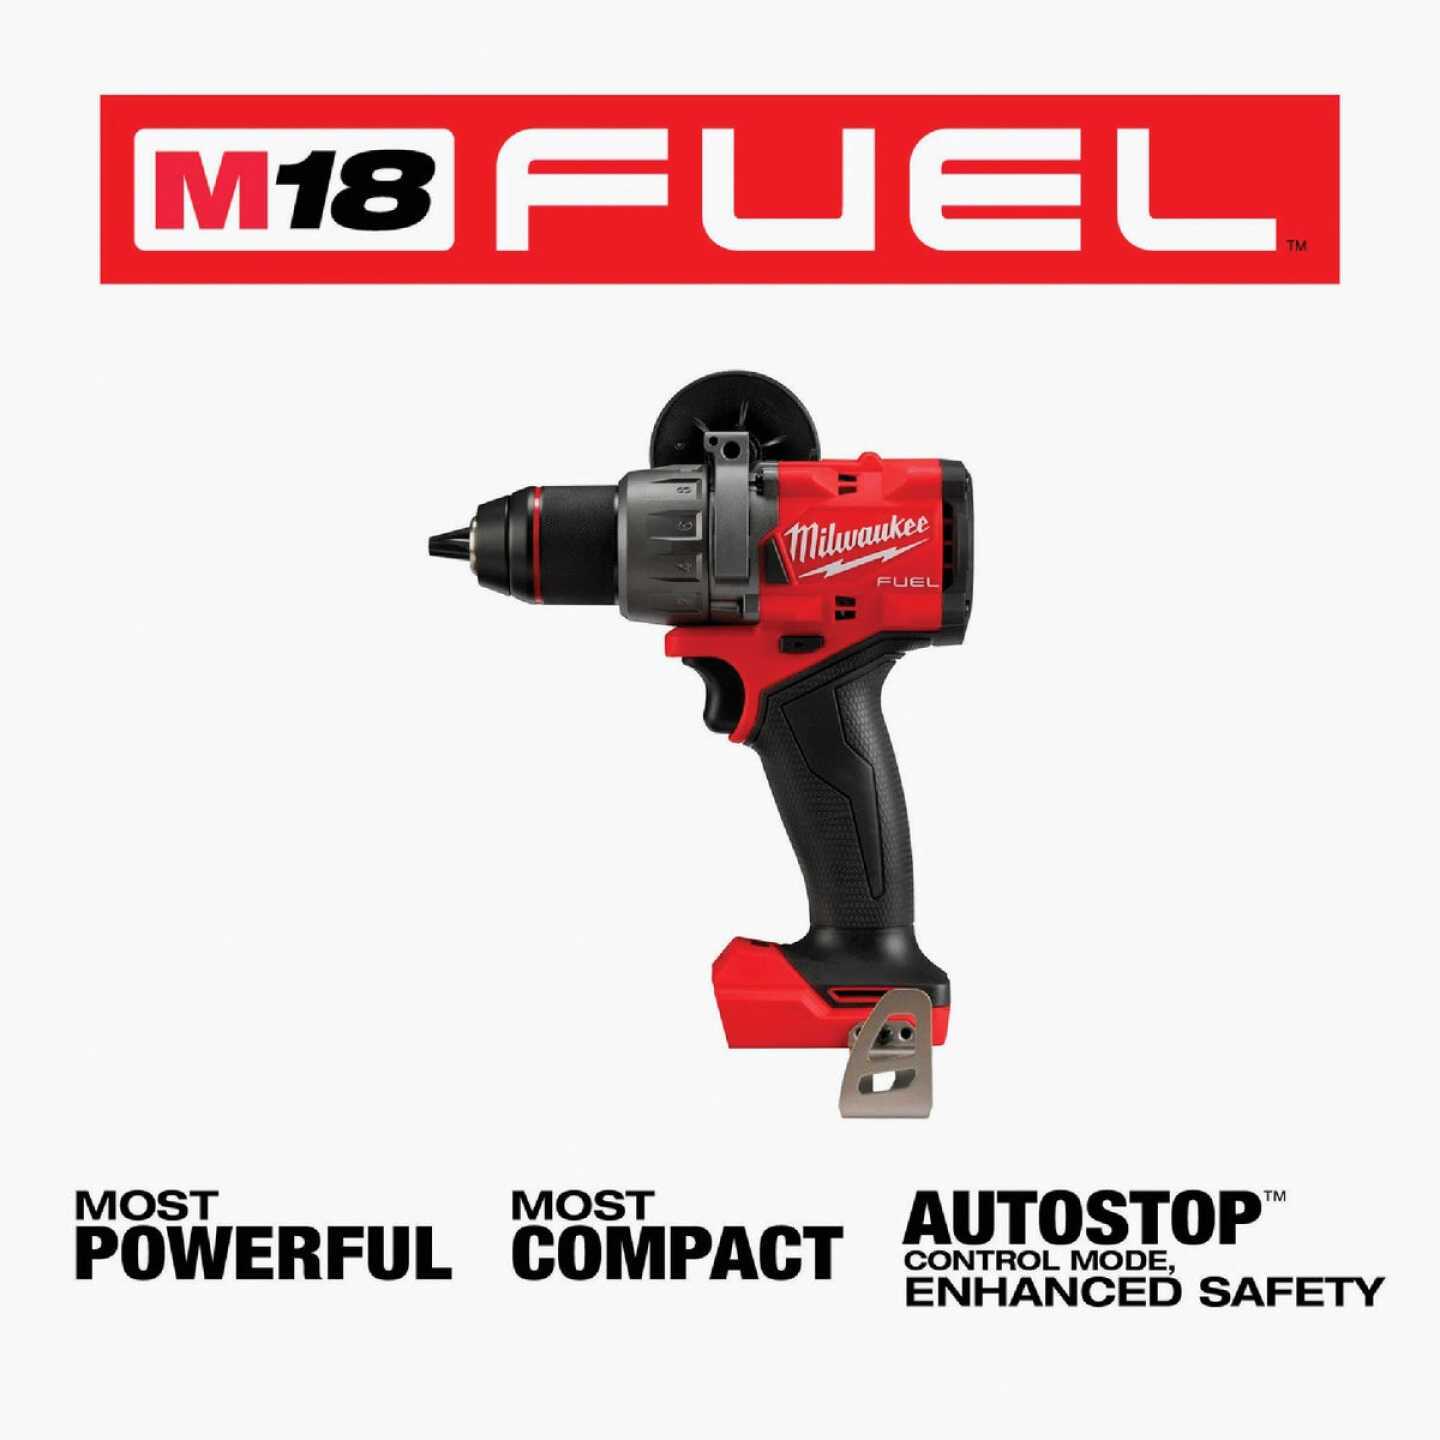 Milwaukee M12 FUEL Brushless 1/2 In. Subcompact Cordless Drill